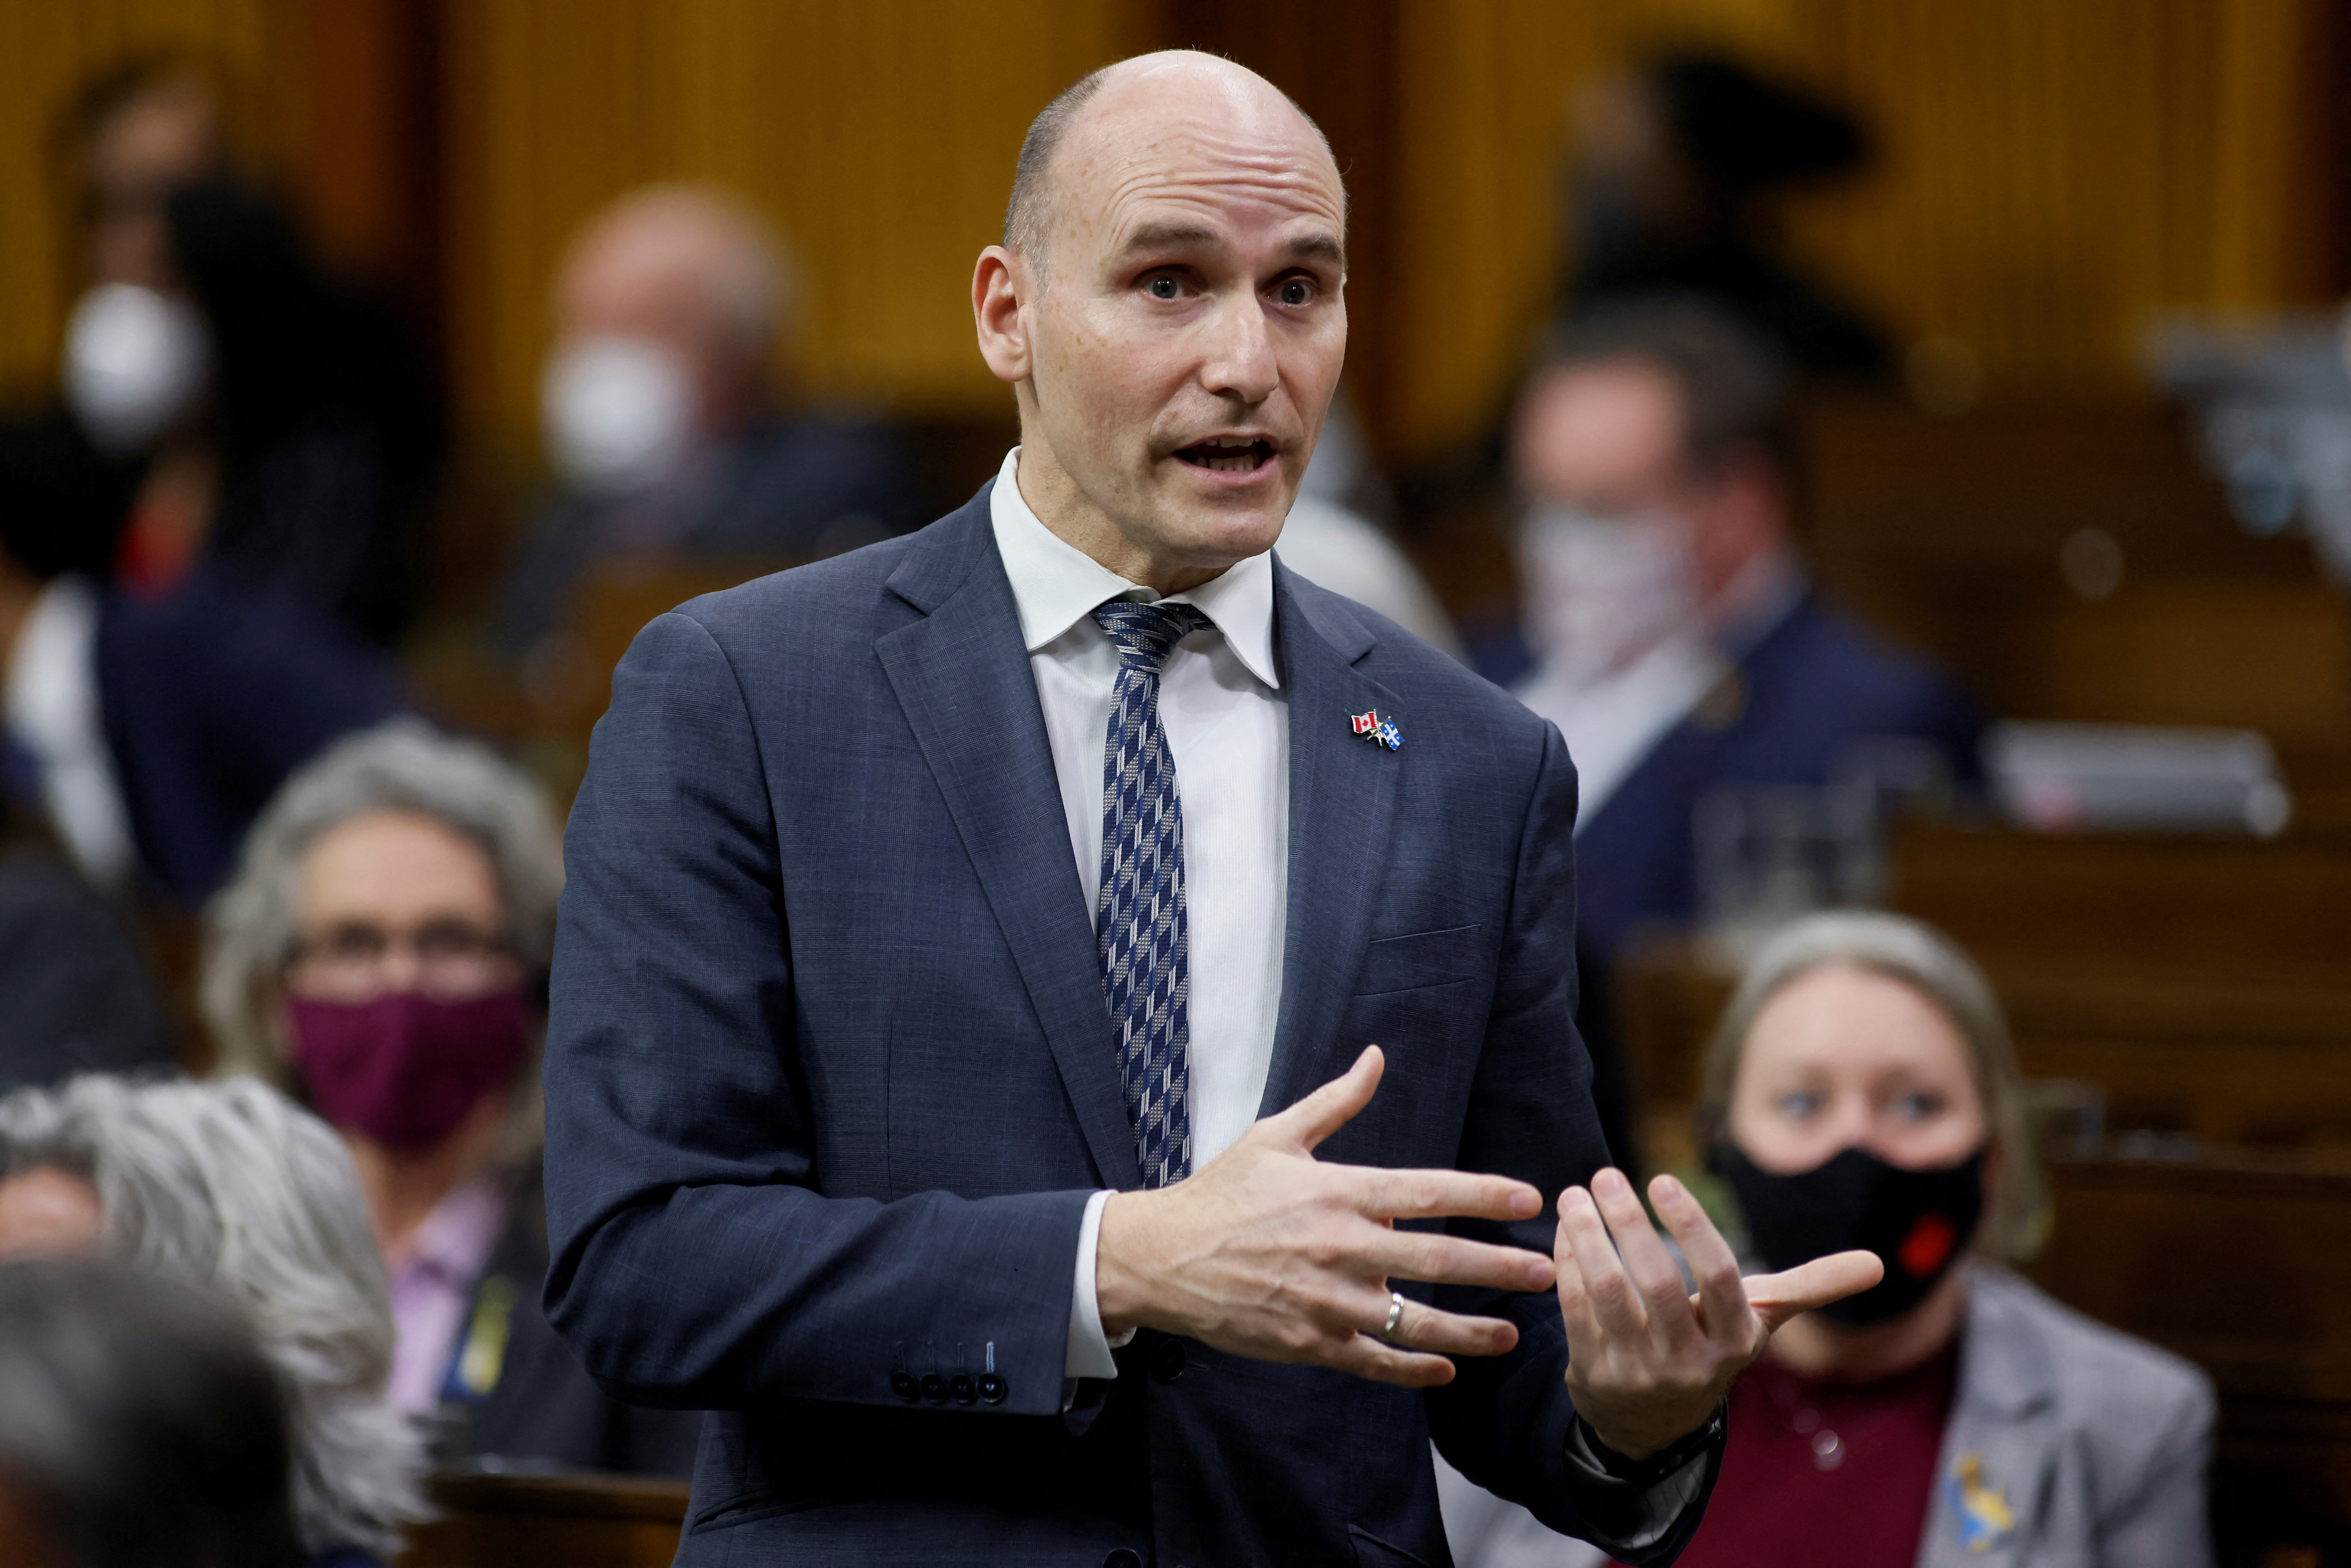 Canada's Minister of Health Jean-Yves Duclos speaks during Question Period in the House of Commons on Parliament Hill in Ottawa